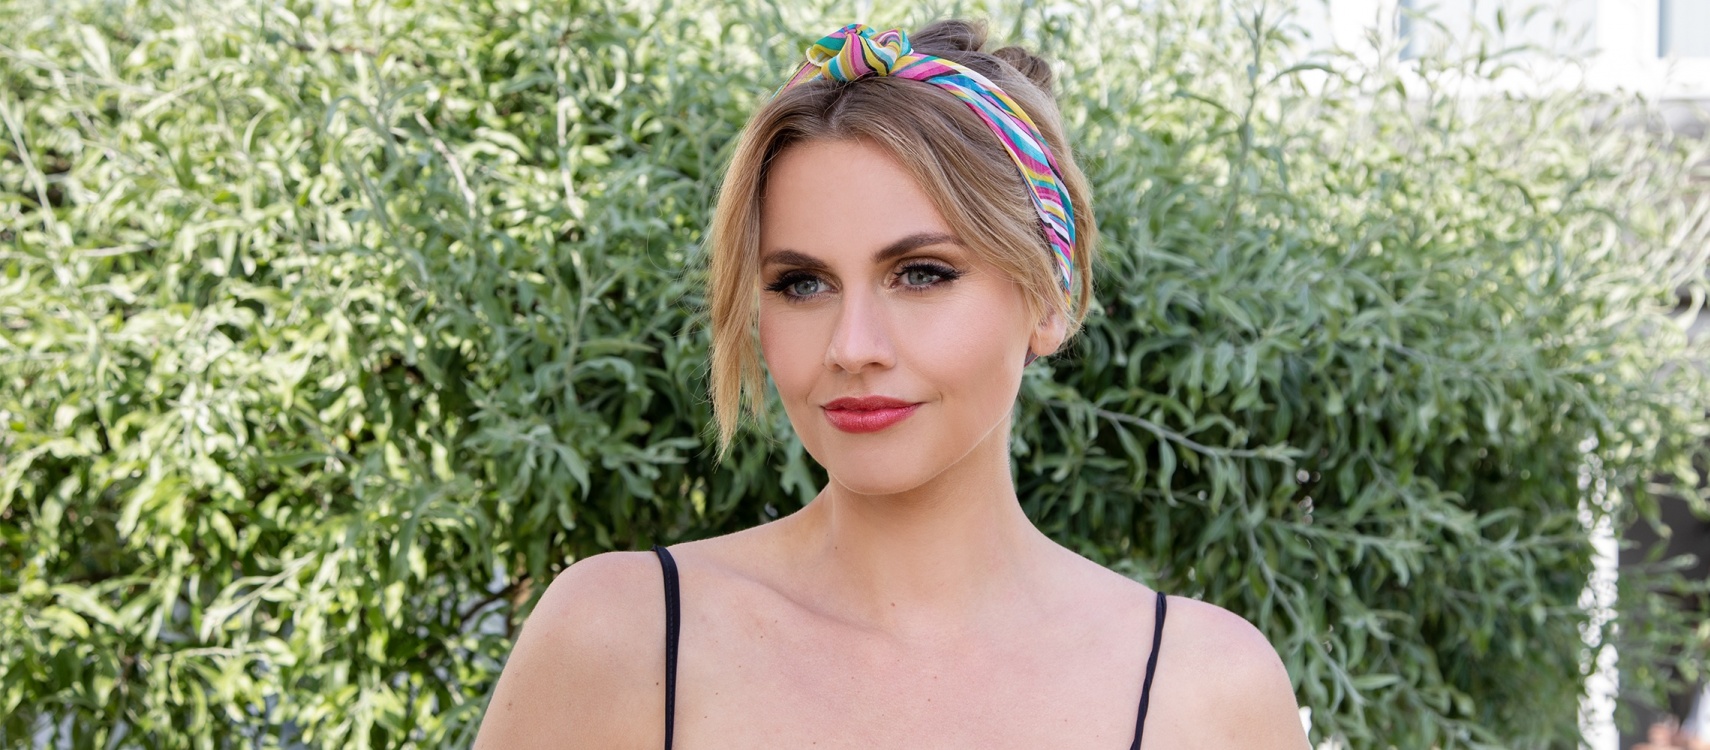 Get inspired by these 3 hair scarf hairstyles 